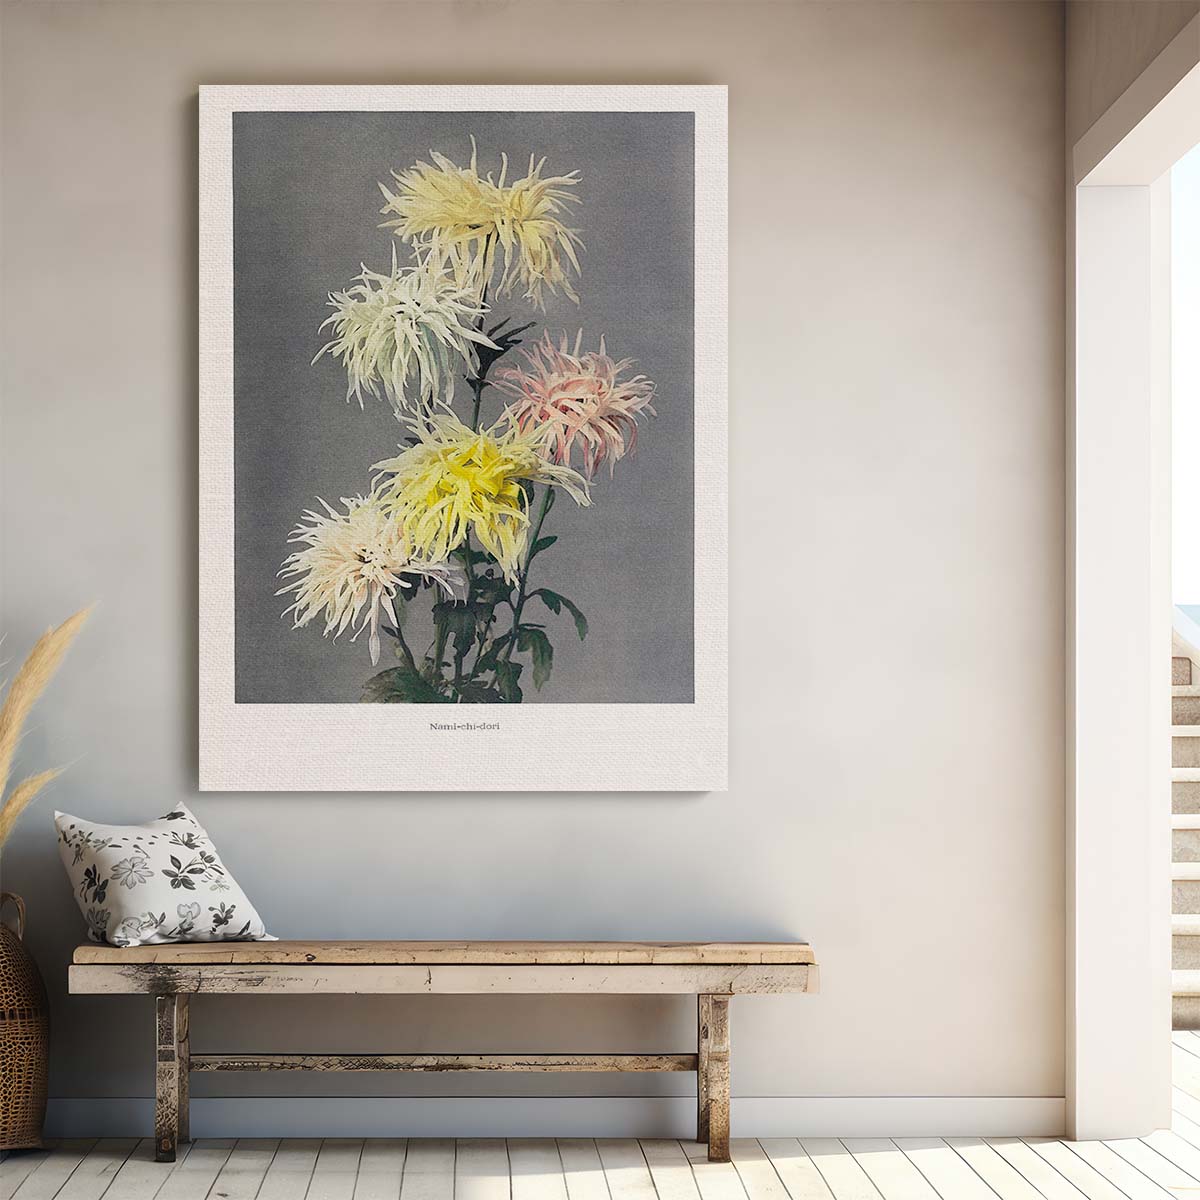 Ohara Koson Japanese Botanical Illustration Wall Art Poster by Luxuriance Designs, made in USA